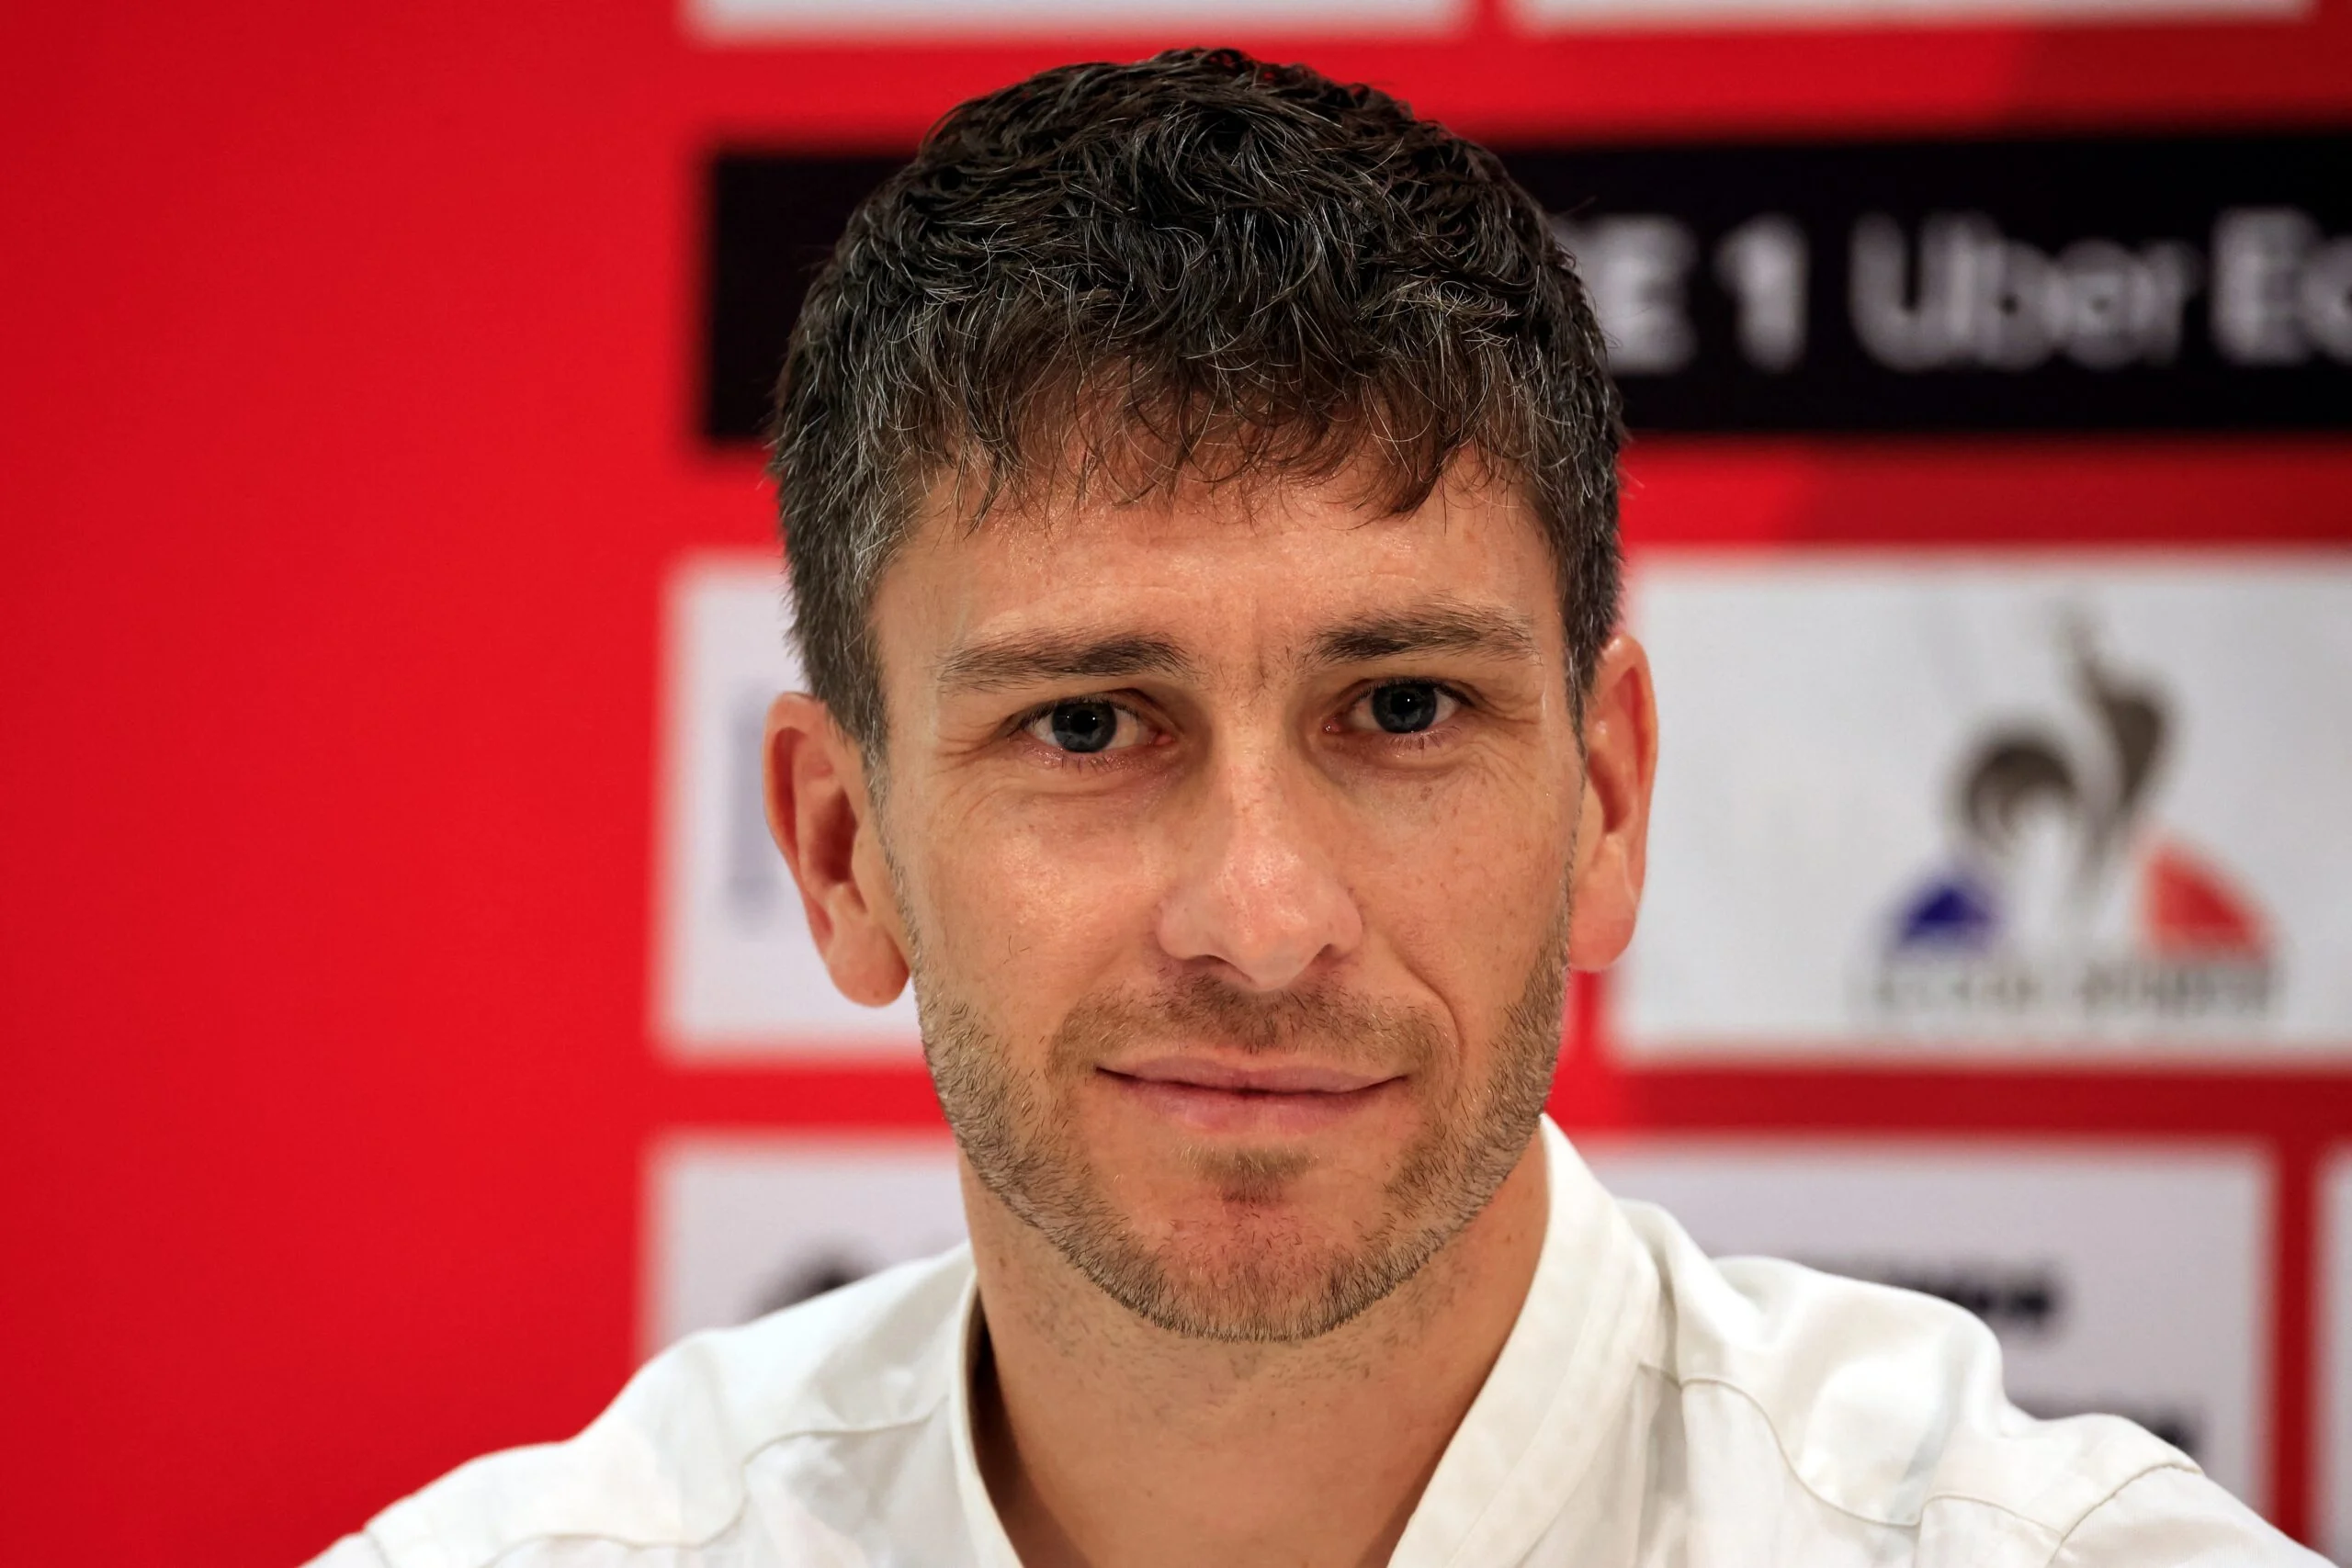 Roma have nabbed their new sporting director, as Nice president Jean-Pierre Riviere confirmed that Florent Ghisolfi will leave to head to Italy.